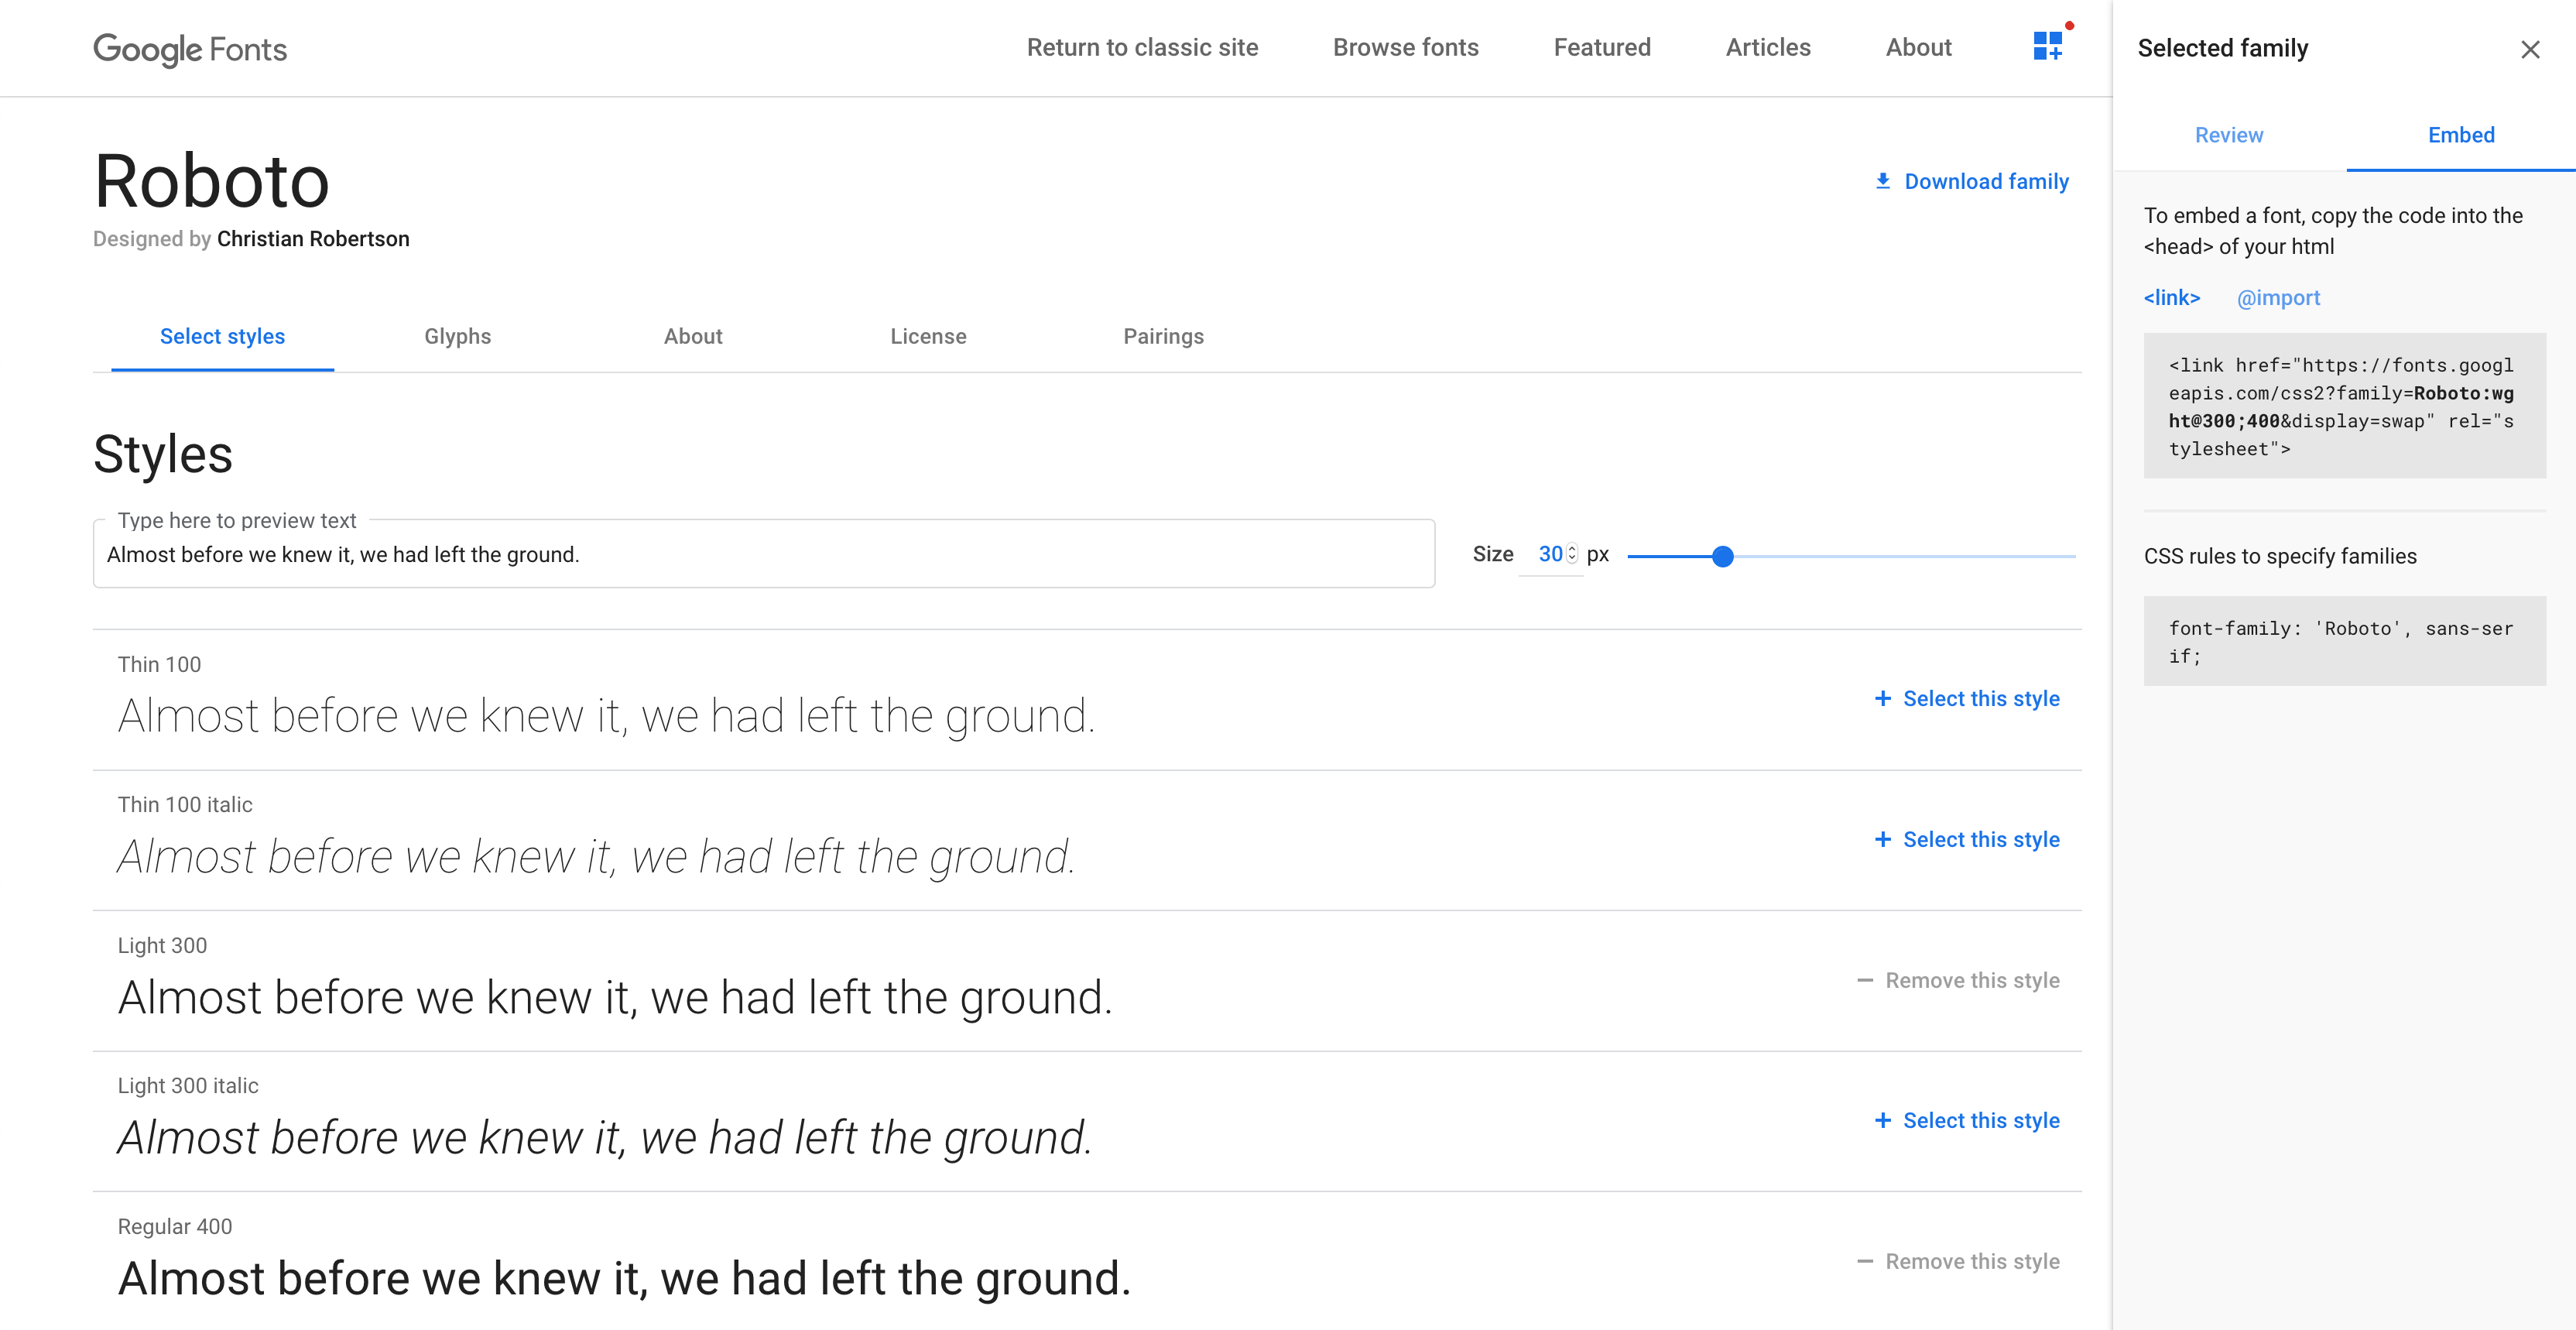 Google Fonts page